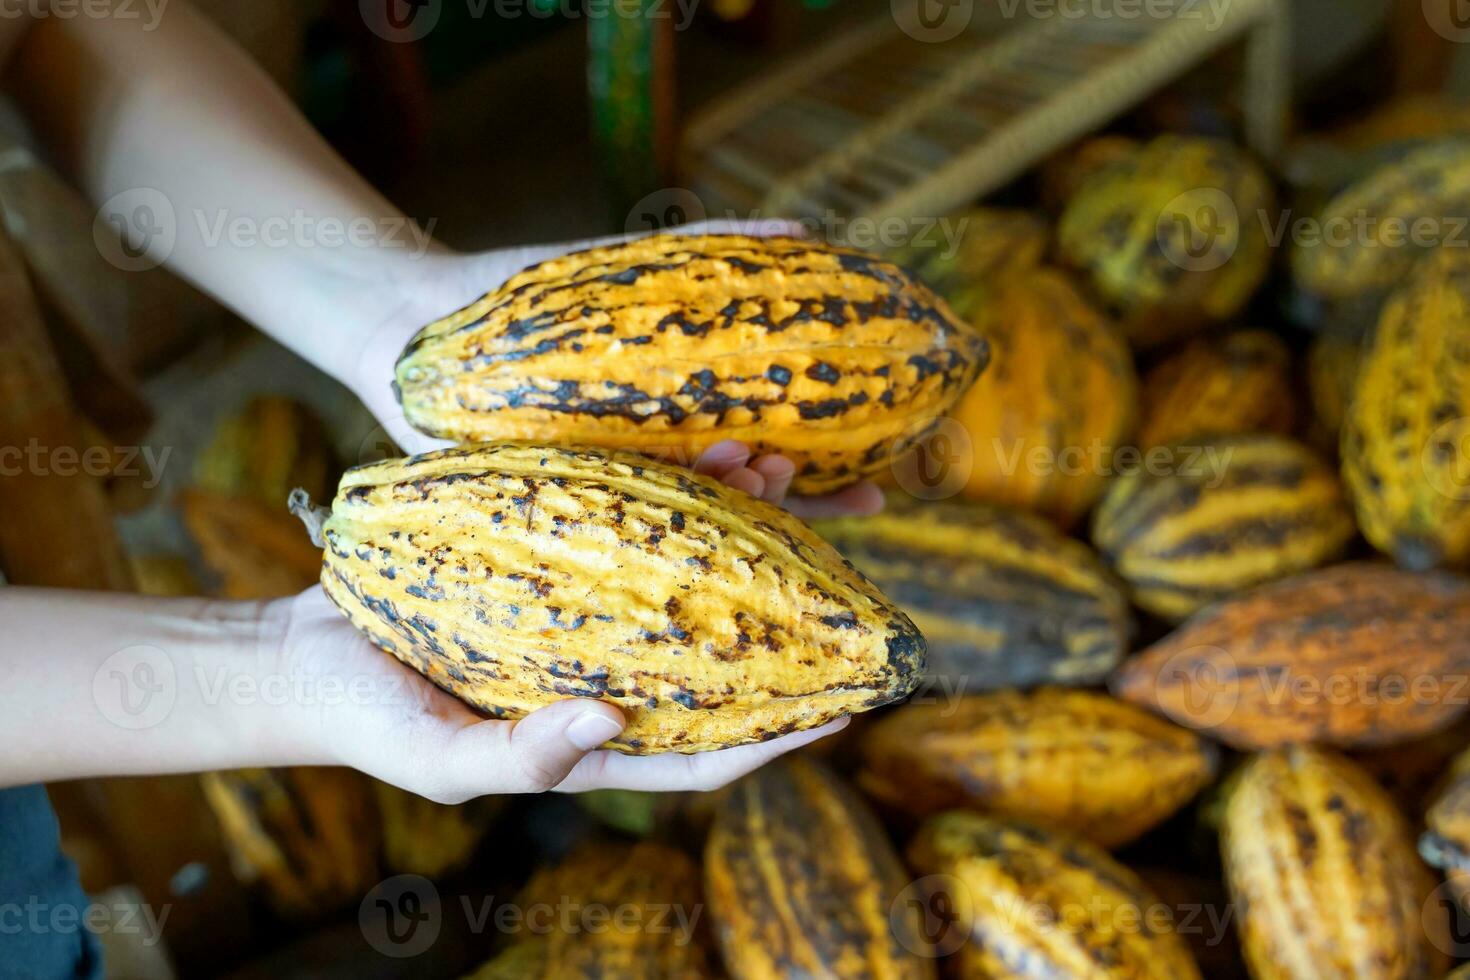 Cocoa, Cacao, Chocolate Nut Tree. Fruit shaped like a papaya on the trunk or branches. Gourd-like skin, thick skin, cocoa beans are processed into chocolate. Soft and selective focus. photo